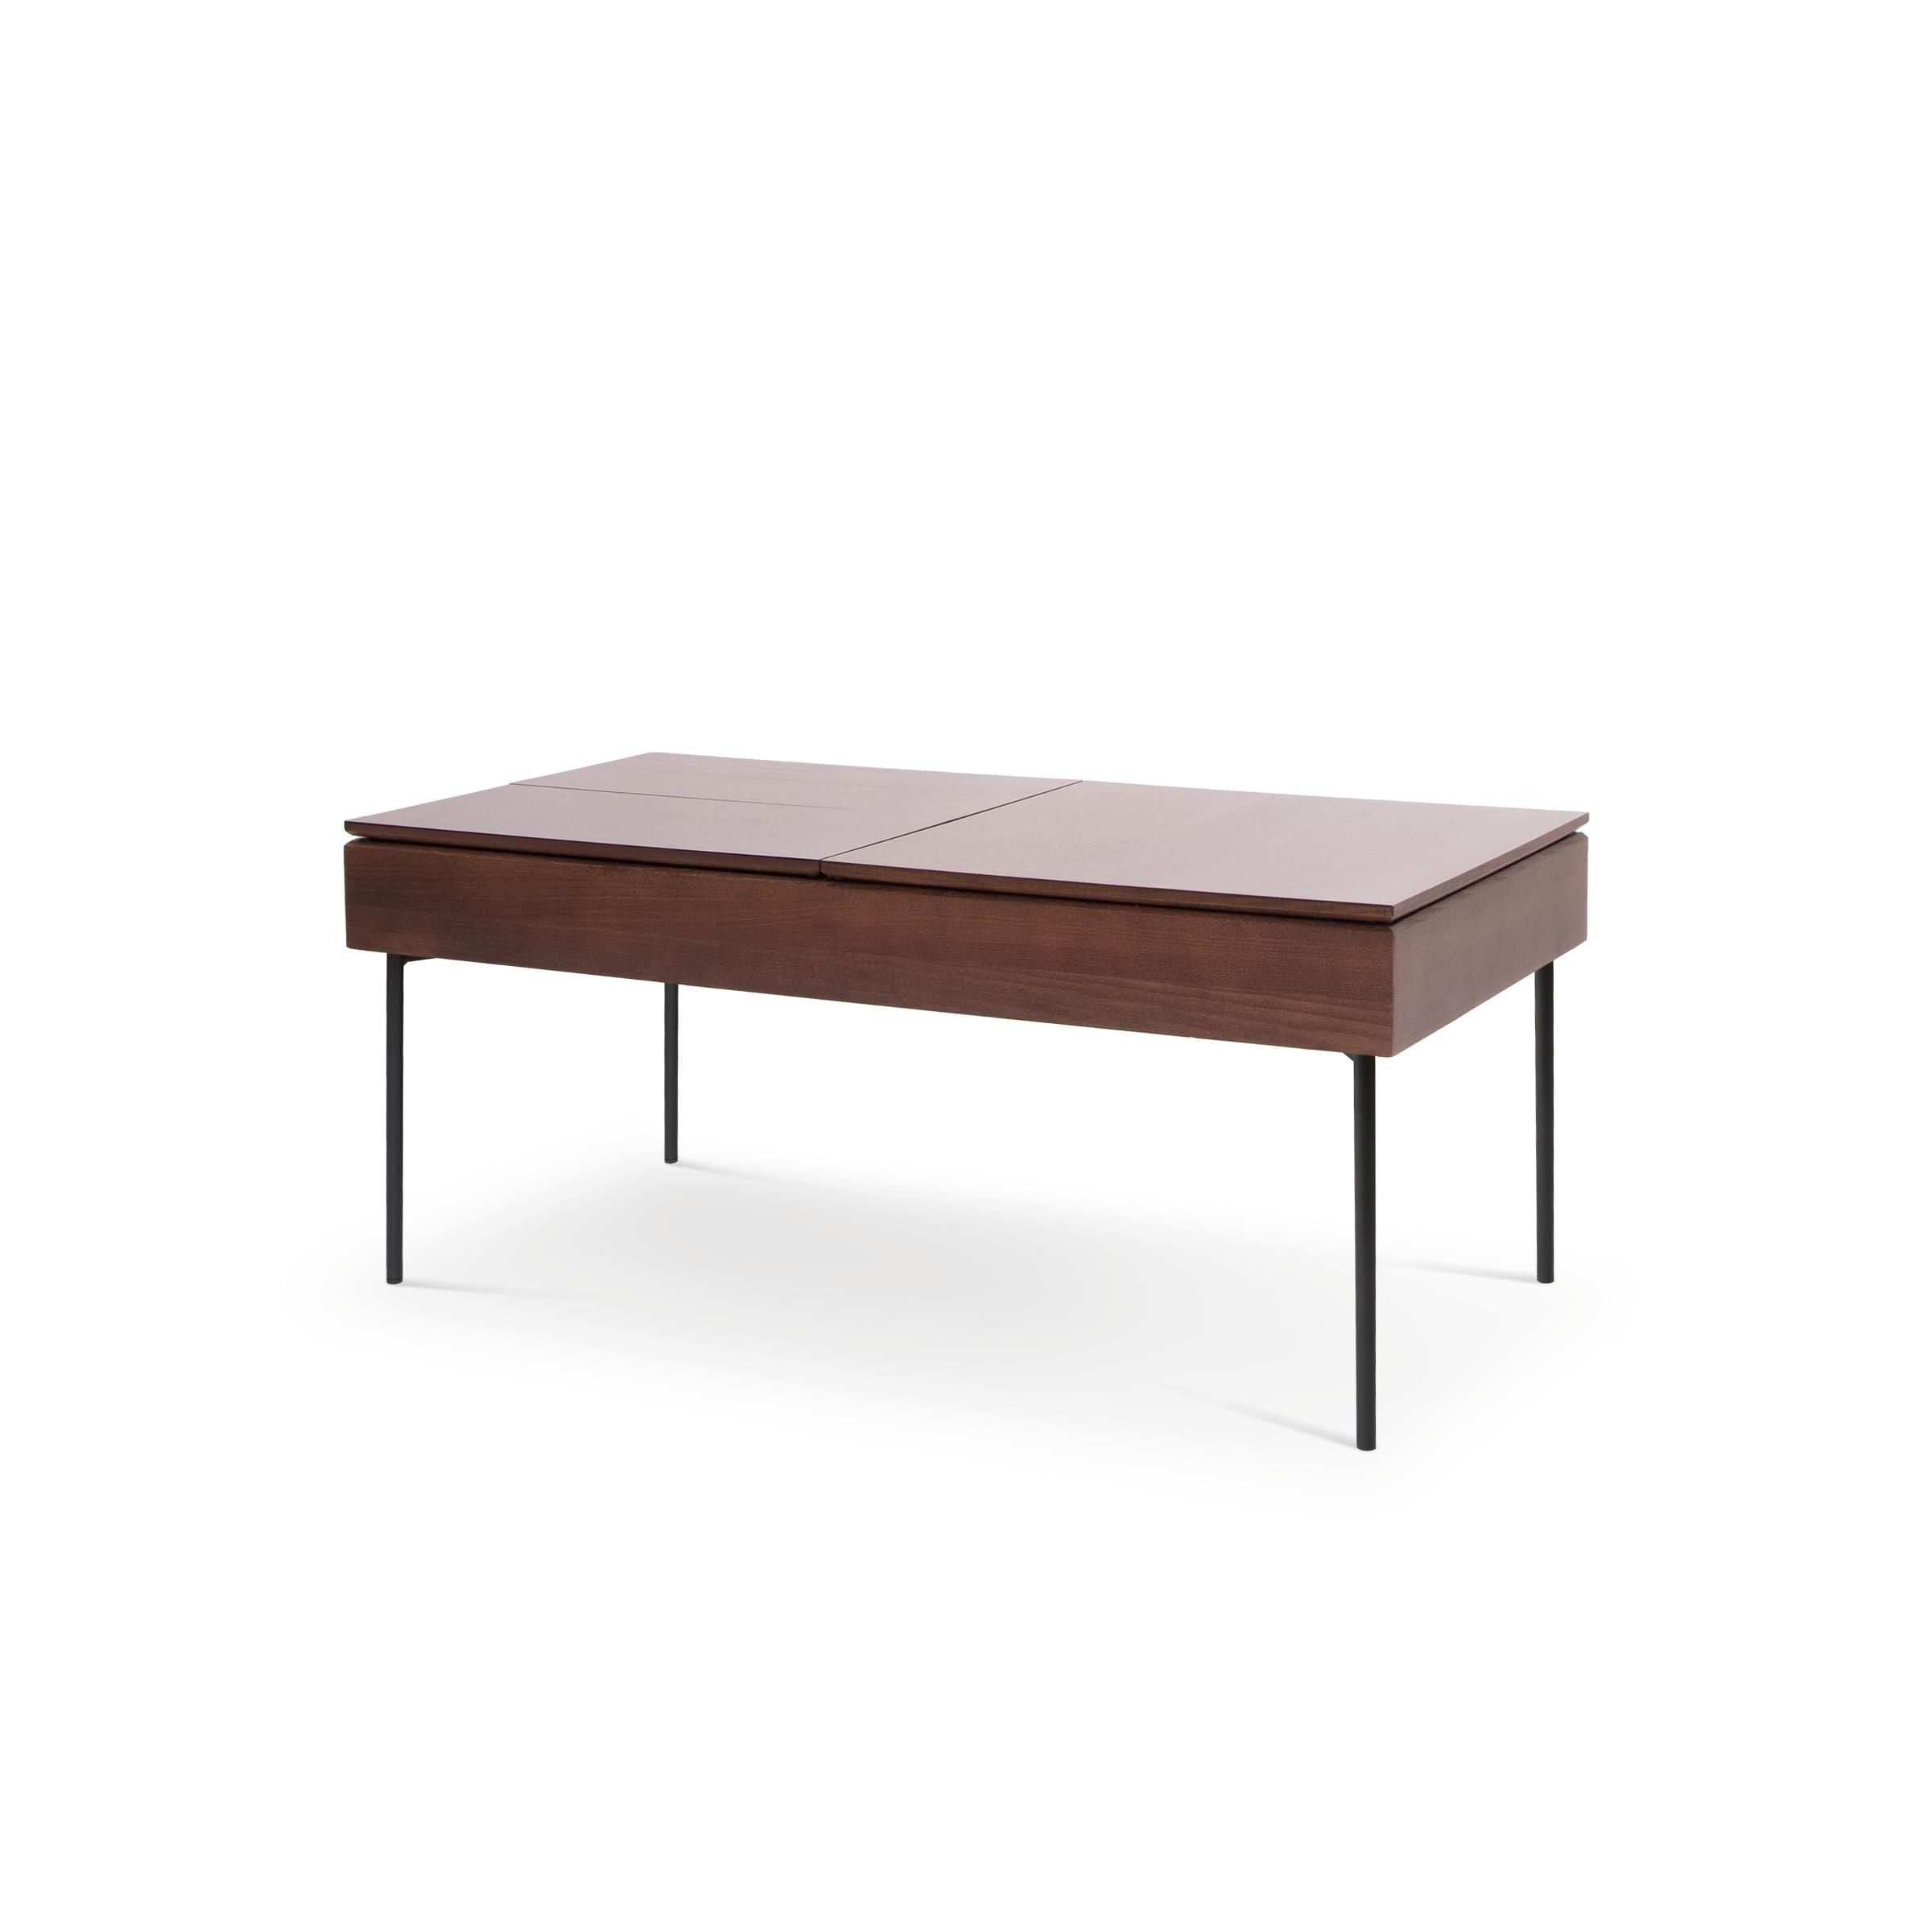 The Carta Coffee Table in Walnut with Straight Legs